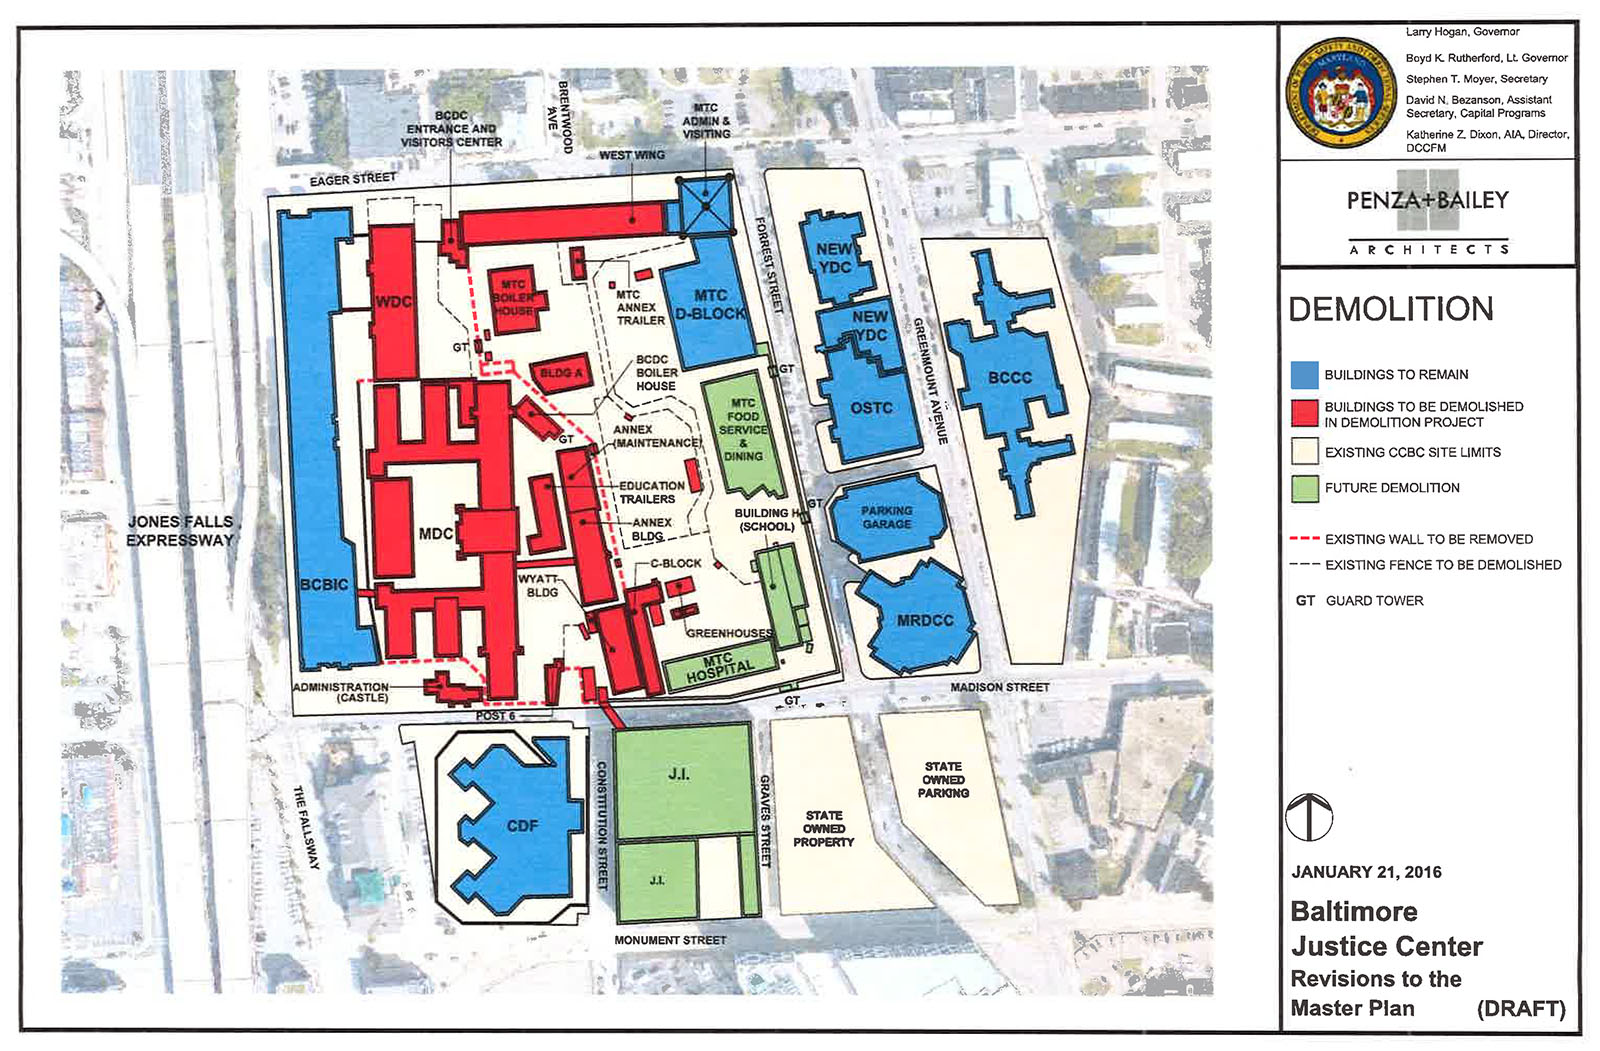 Buildings proposed for demolition in 2017 are marked in red. Courtesy Maryland Department of Corrections.